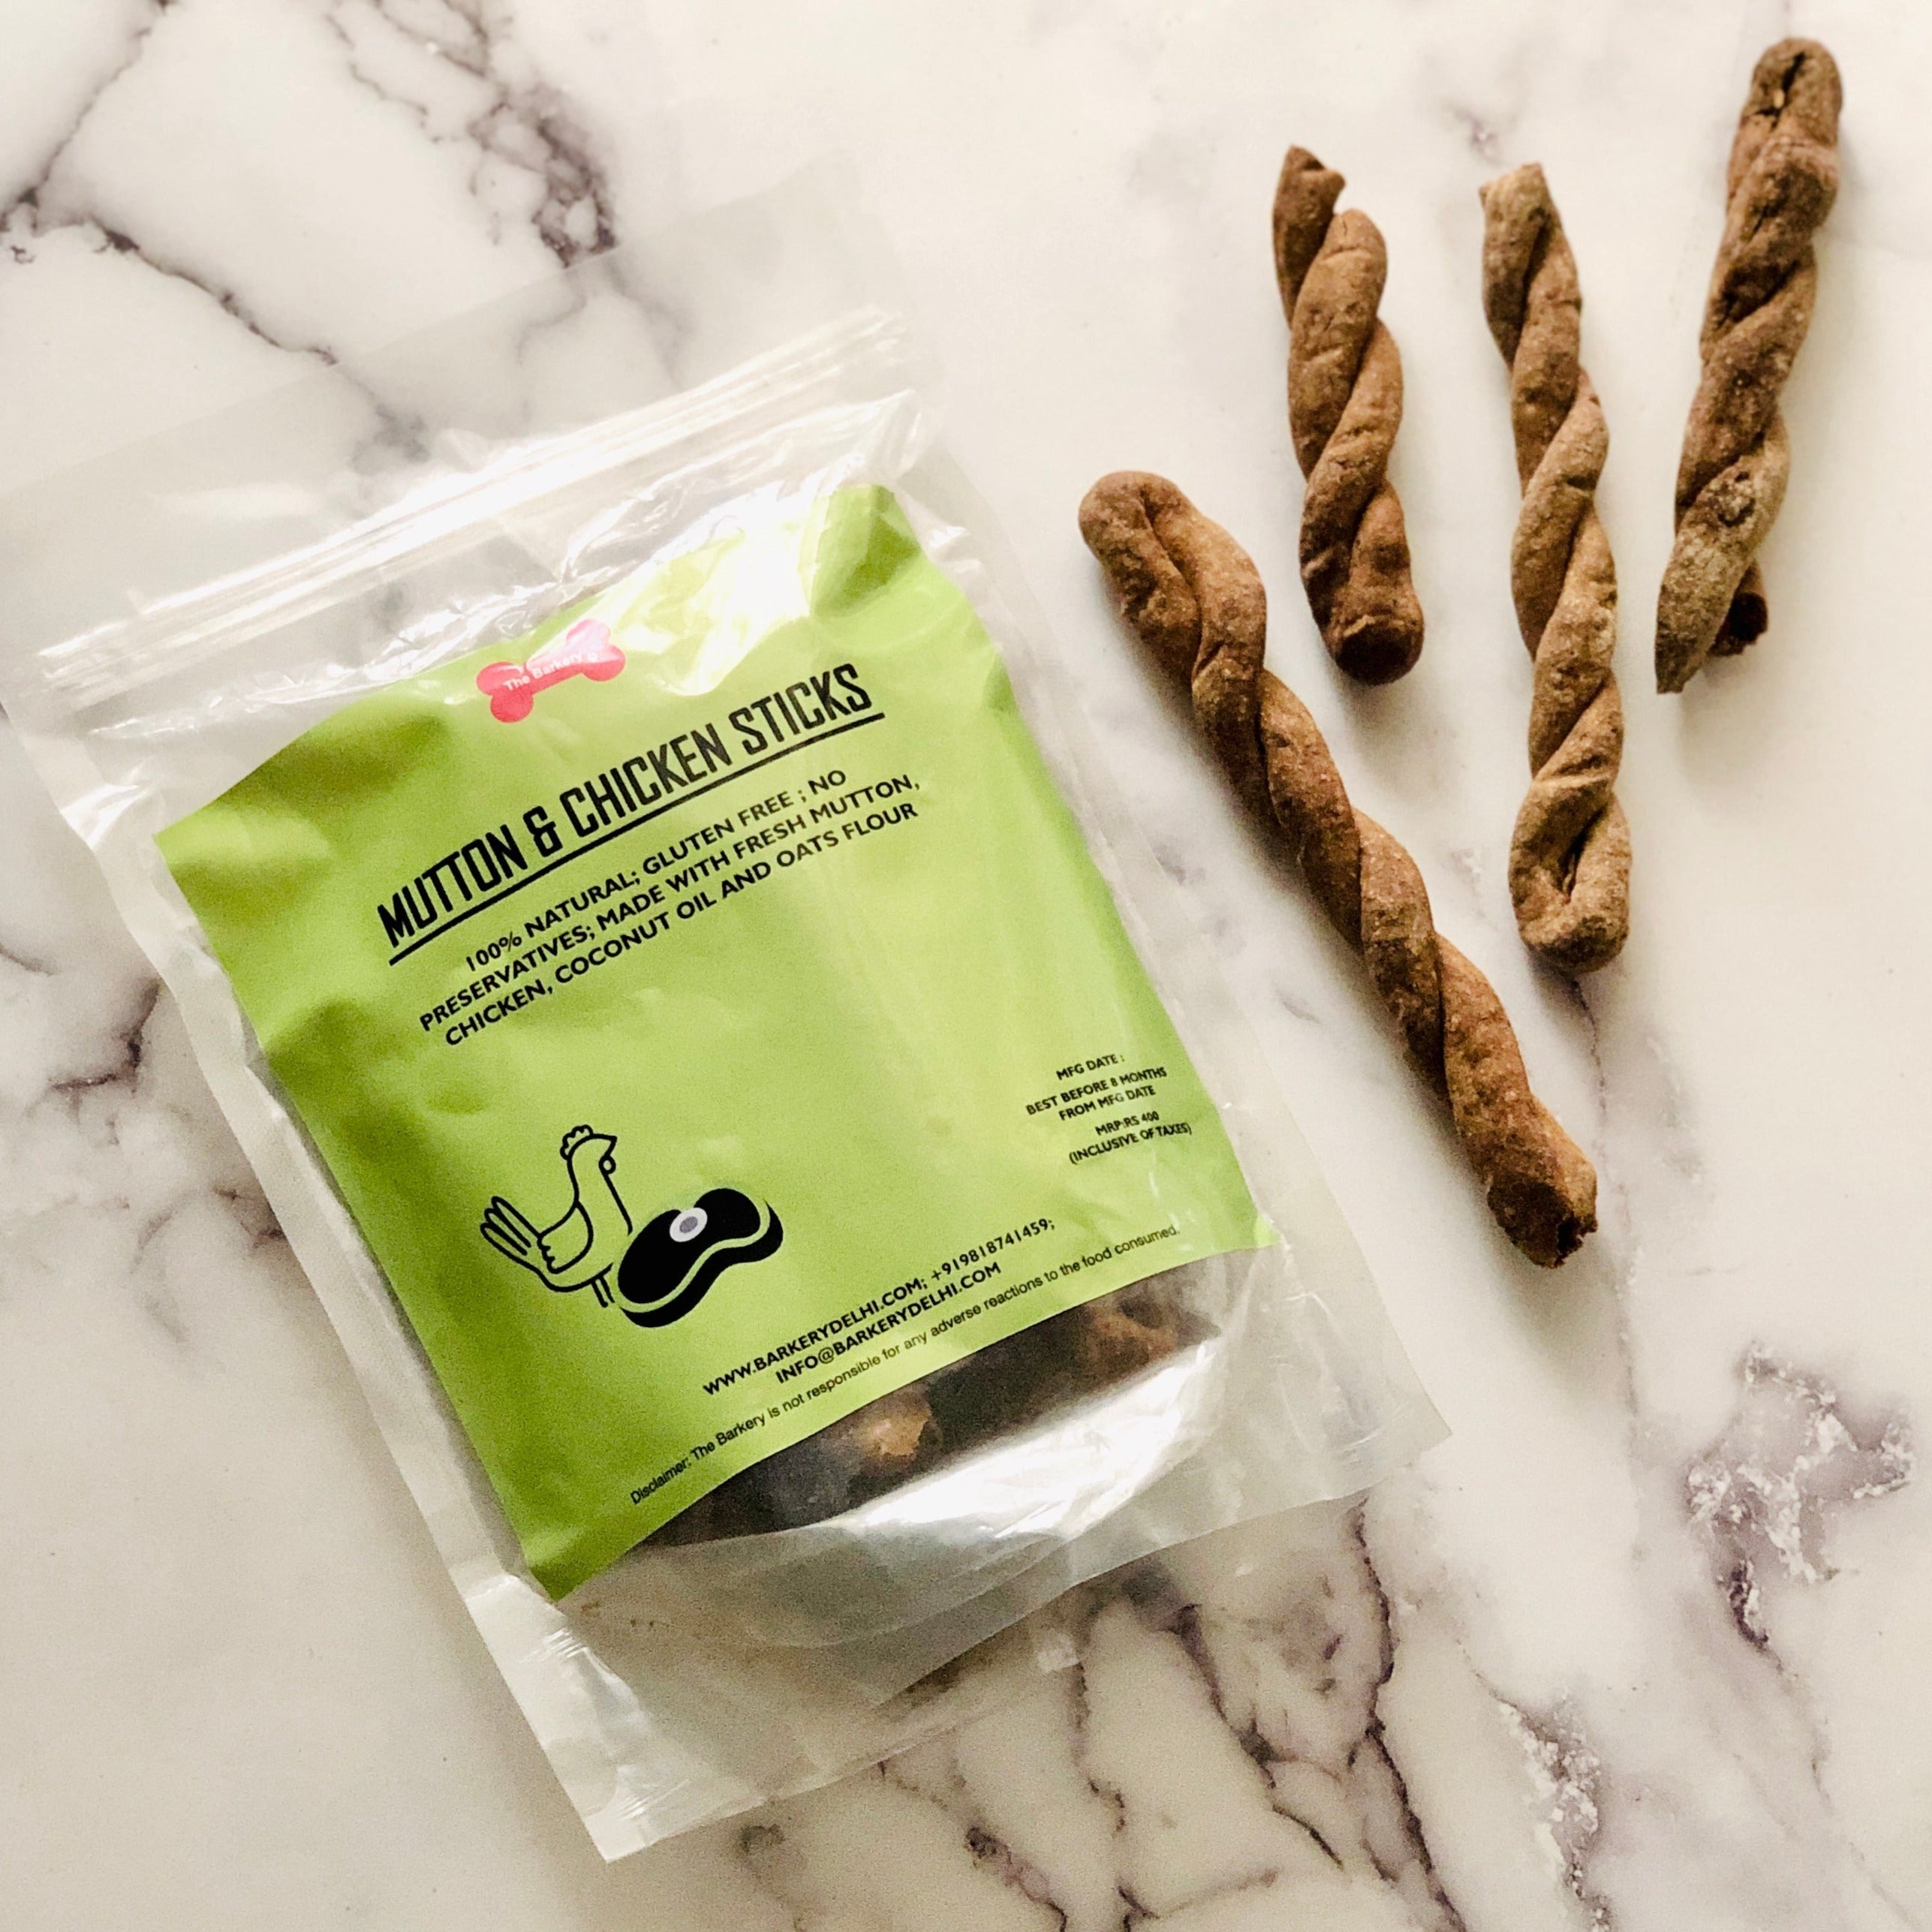 Mutton and Chicken Sticks for Dogs